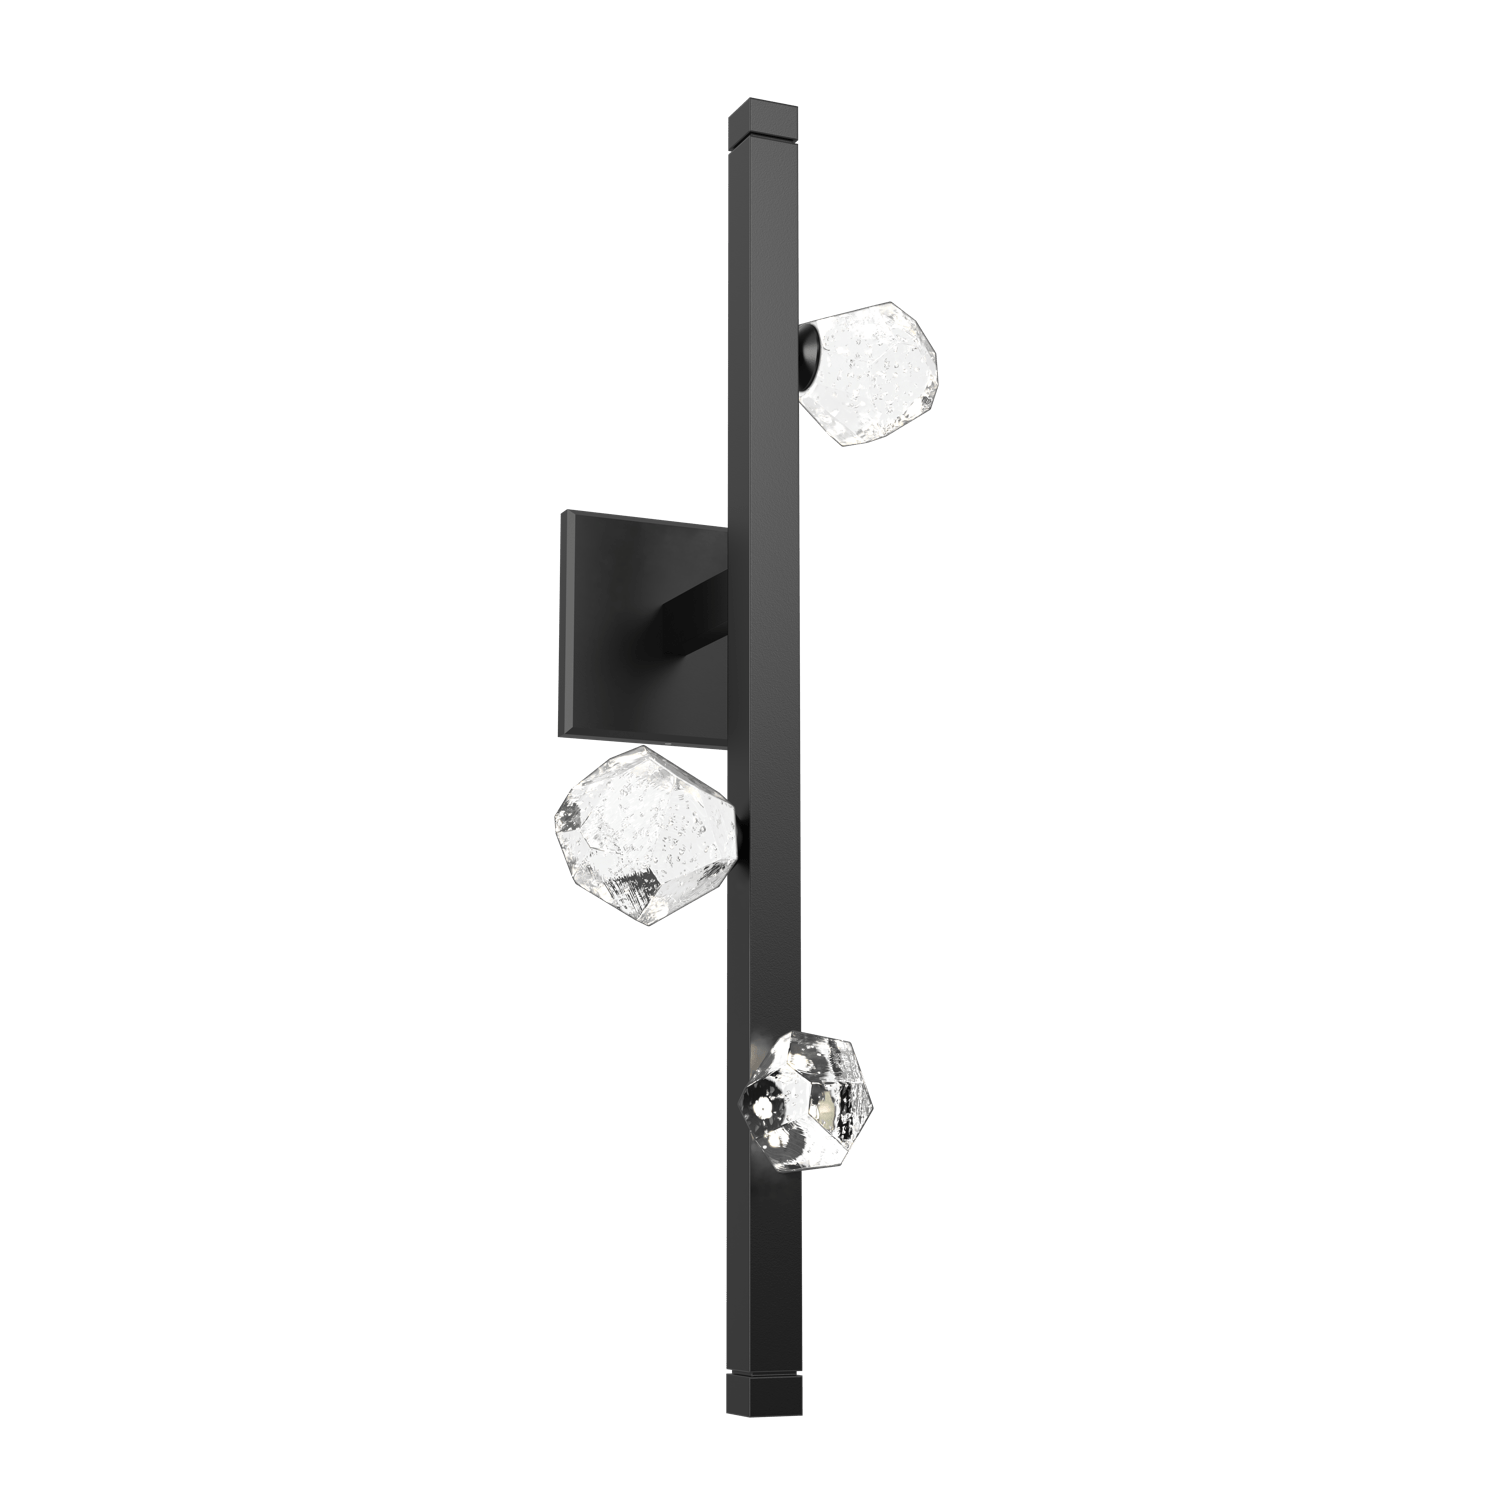 IDB0070-24-MB-Hammerton-Studio-Stella-wall-sconce-with-matte-black-finish-and-clear-cast-glass-shades-and-LED-lamping